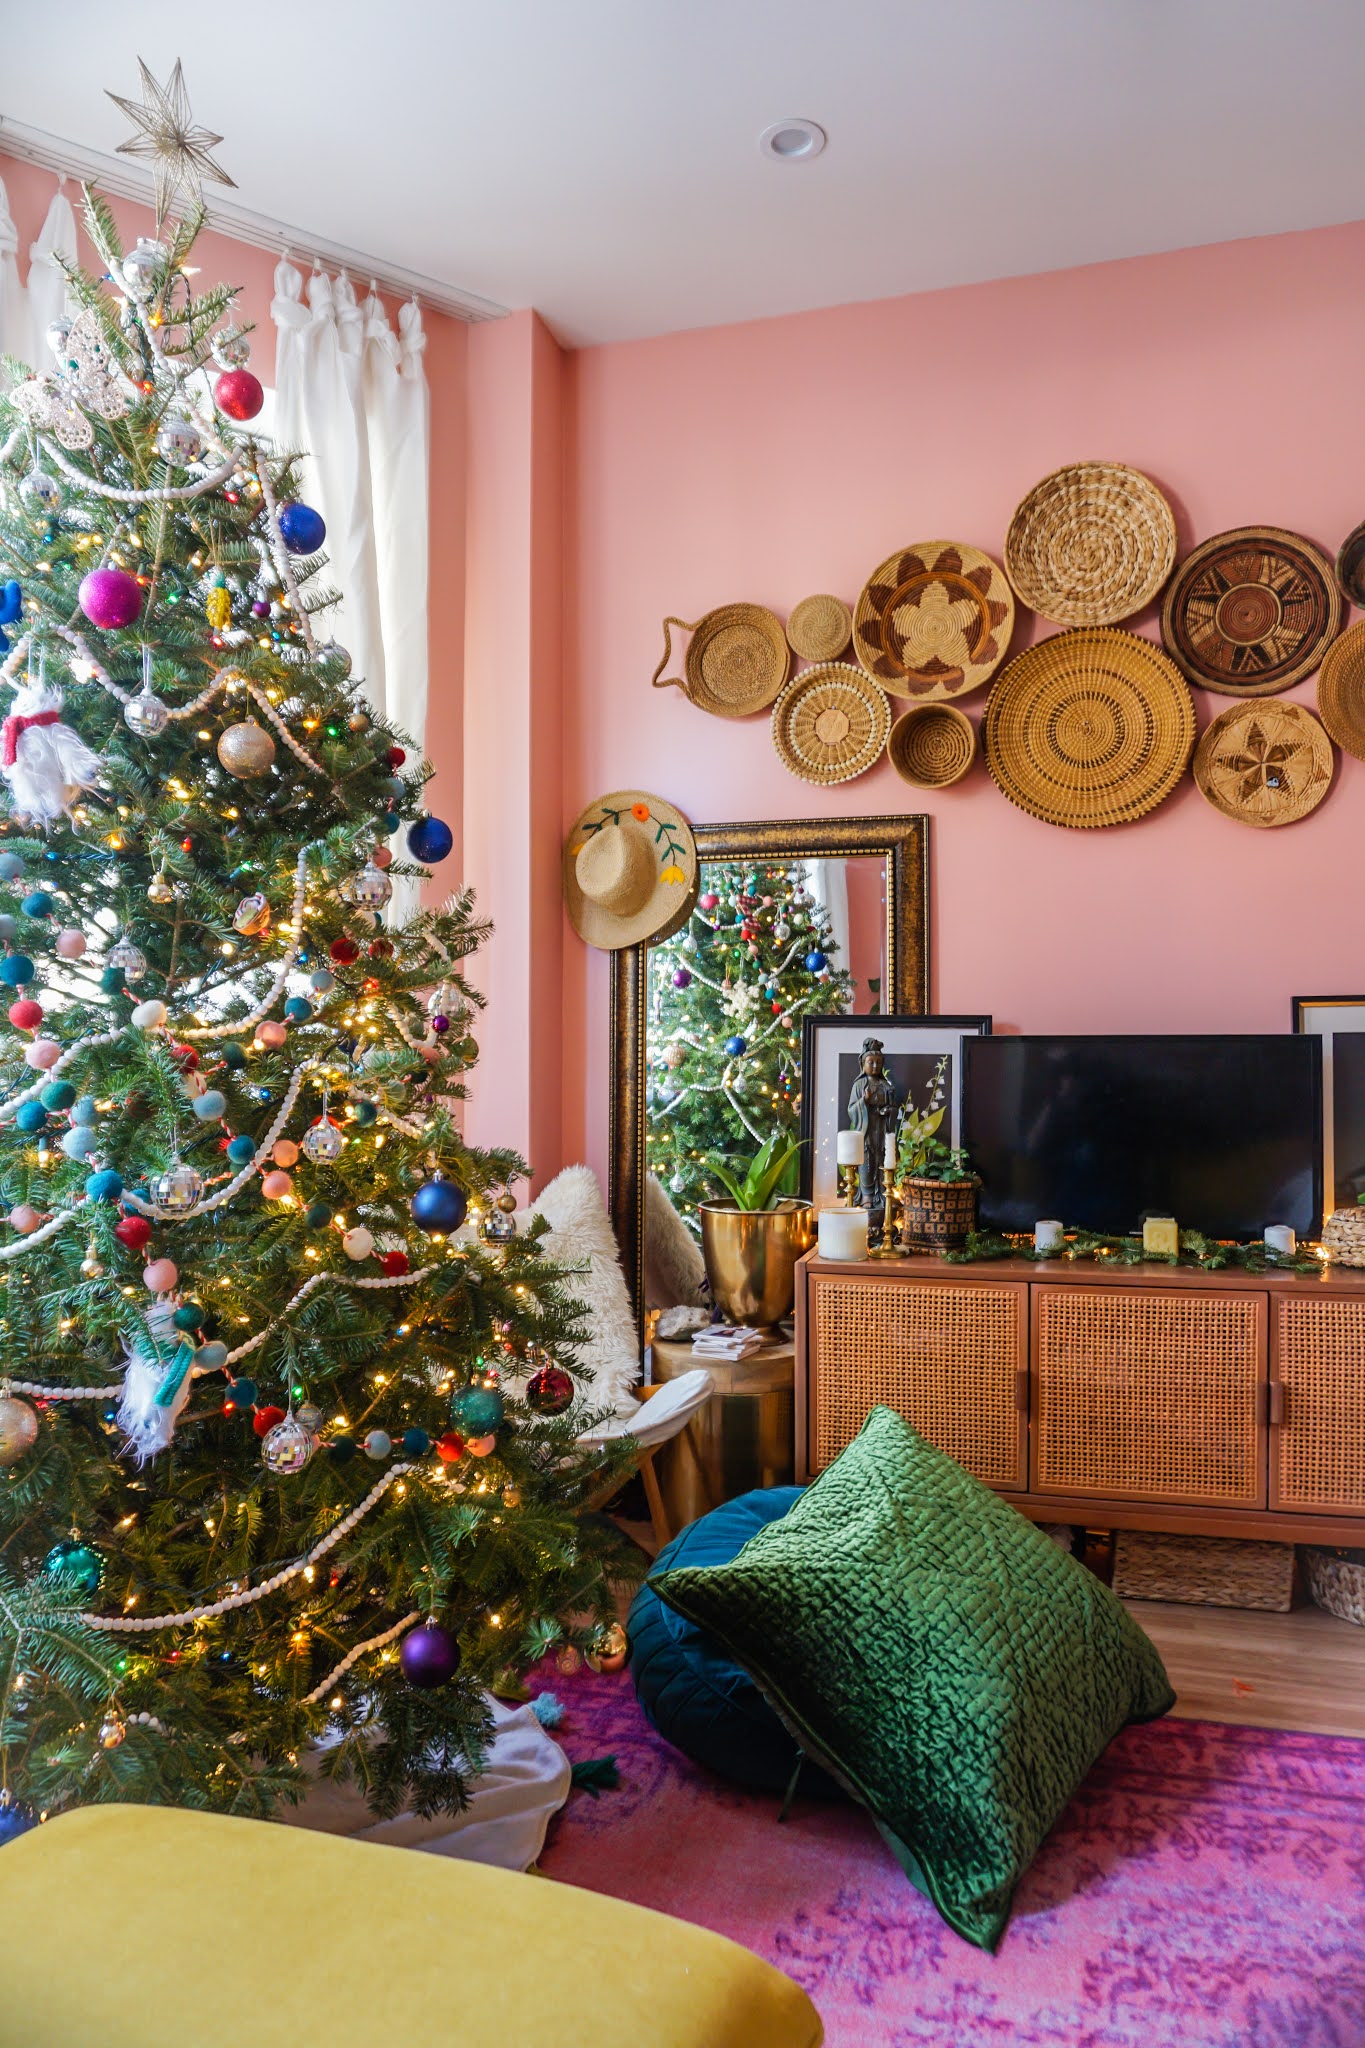 Meet This Year\'s Colorful Eclectic Boho Christmas Decor - TfDiaries